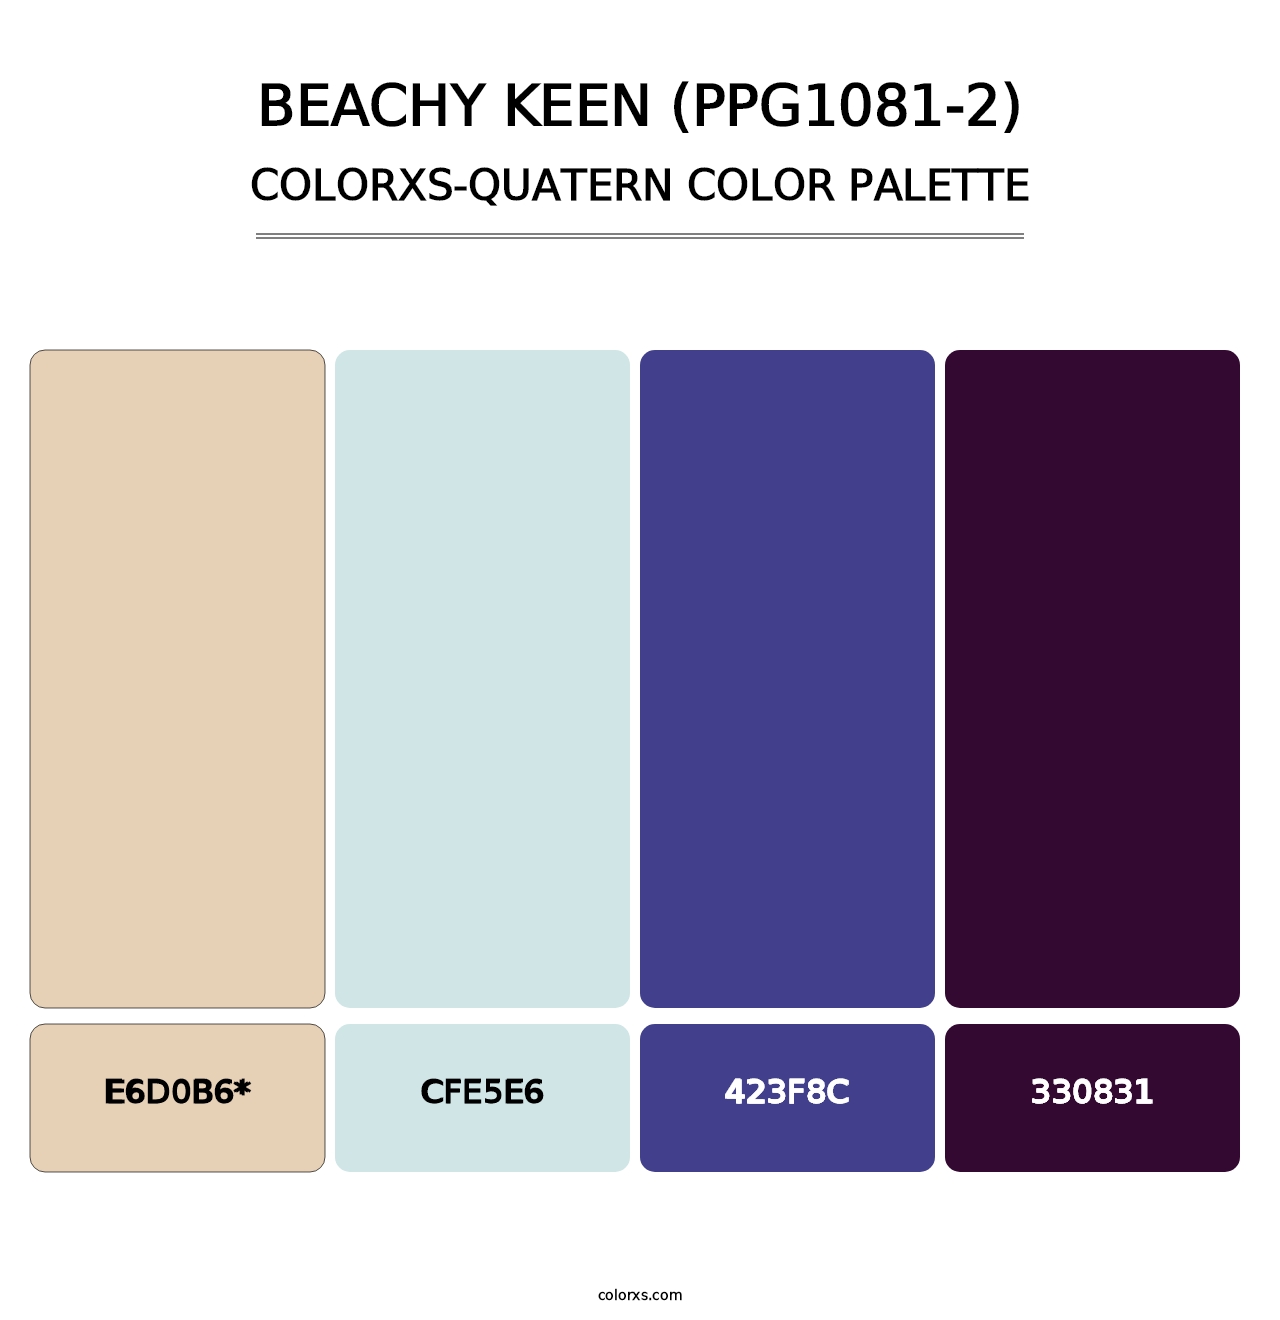 Beachy Keen (PPG1081-2) - Colorxs Quatern Palette